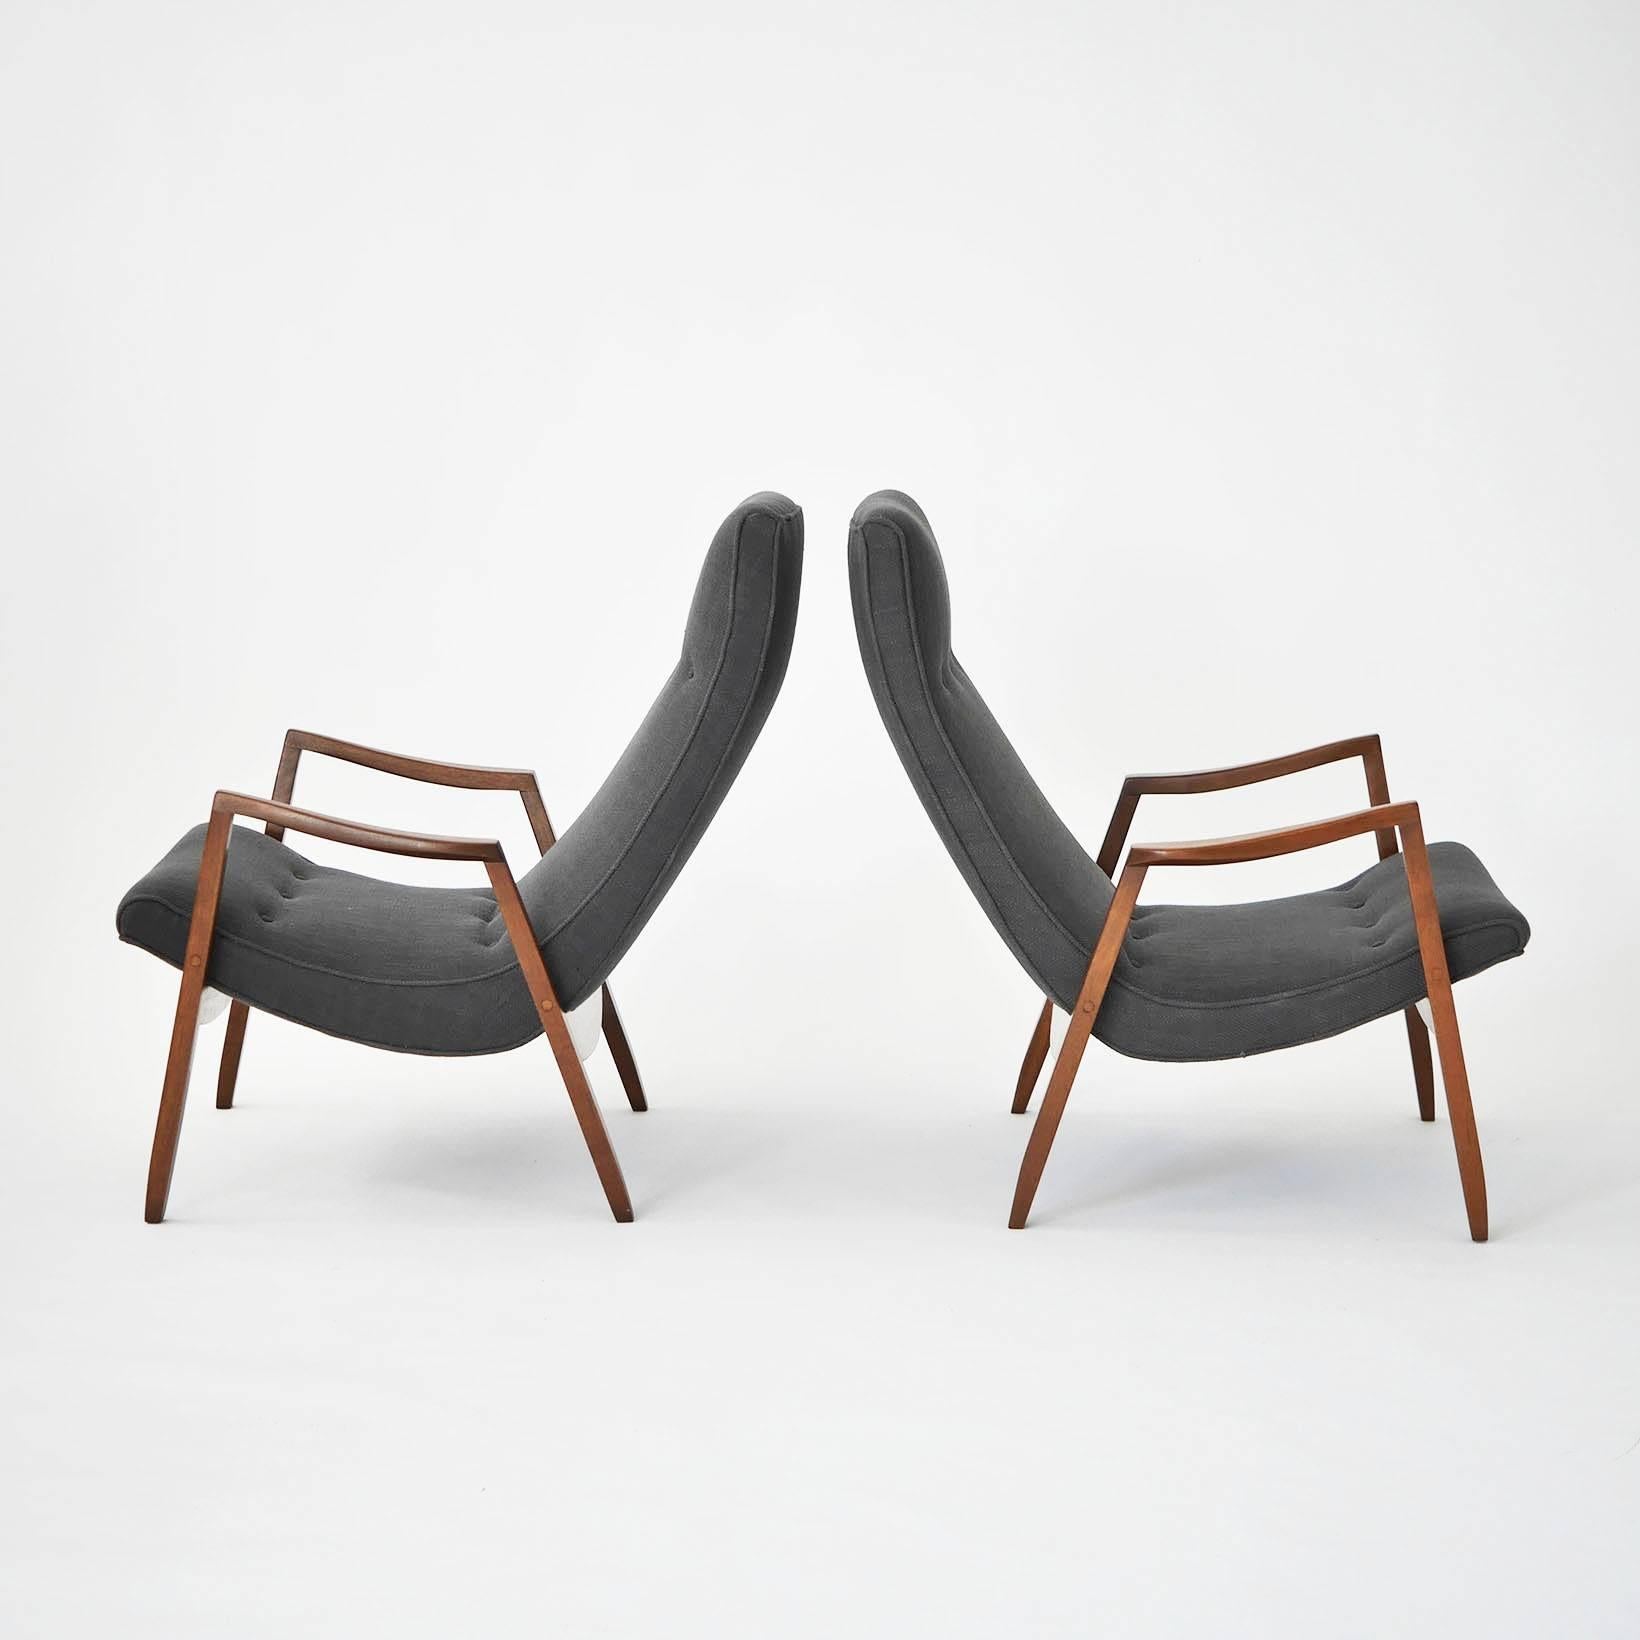 Early pair of Milo Baughman scoop lounge chairs. Walnut frames and slate grey upholstery. Newly restored pair.